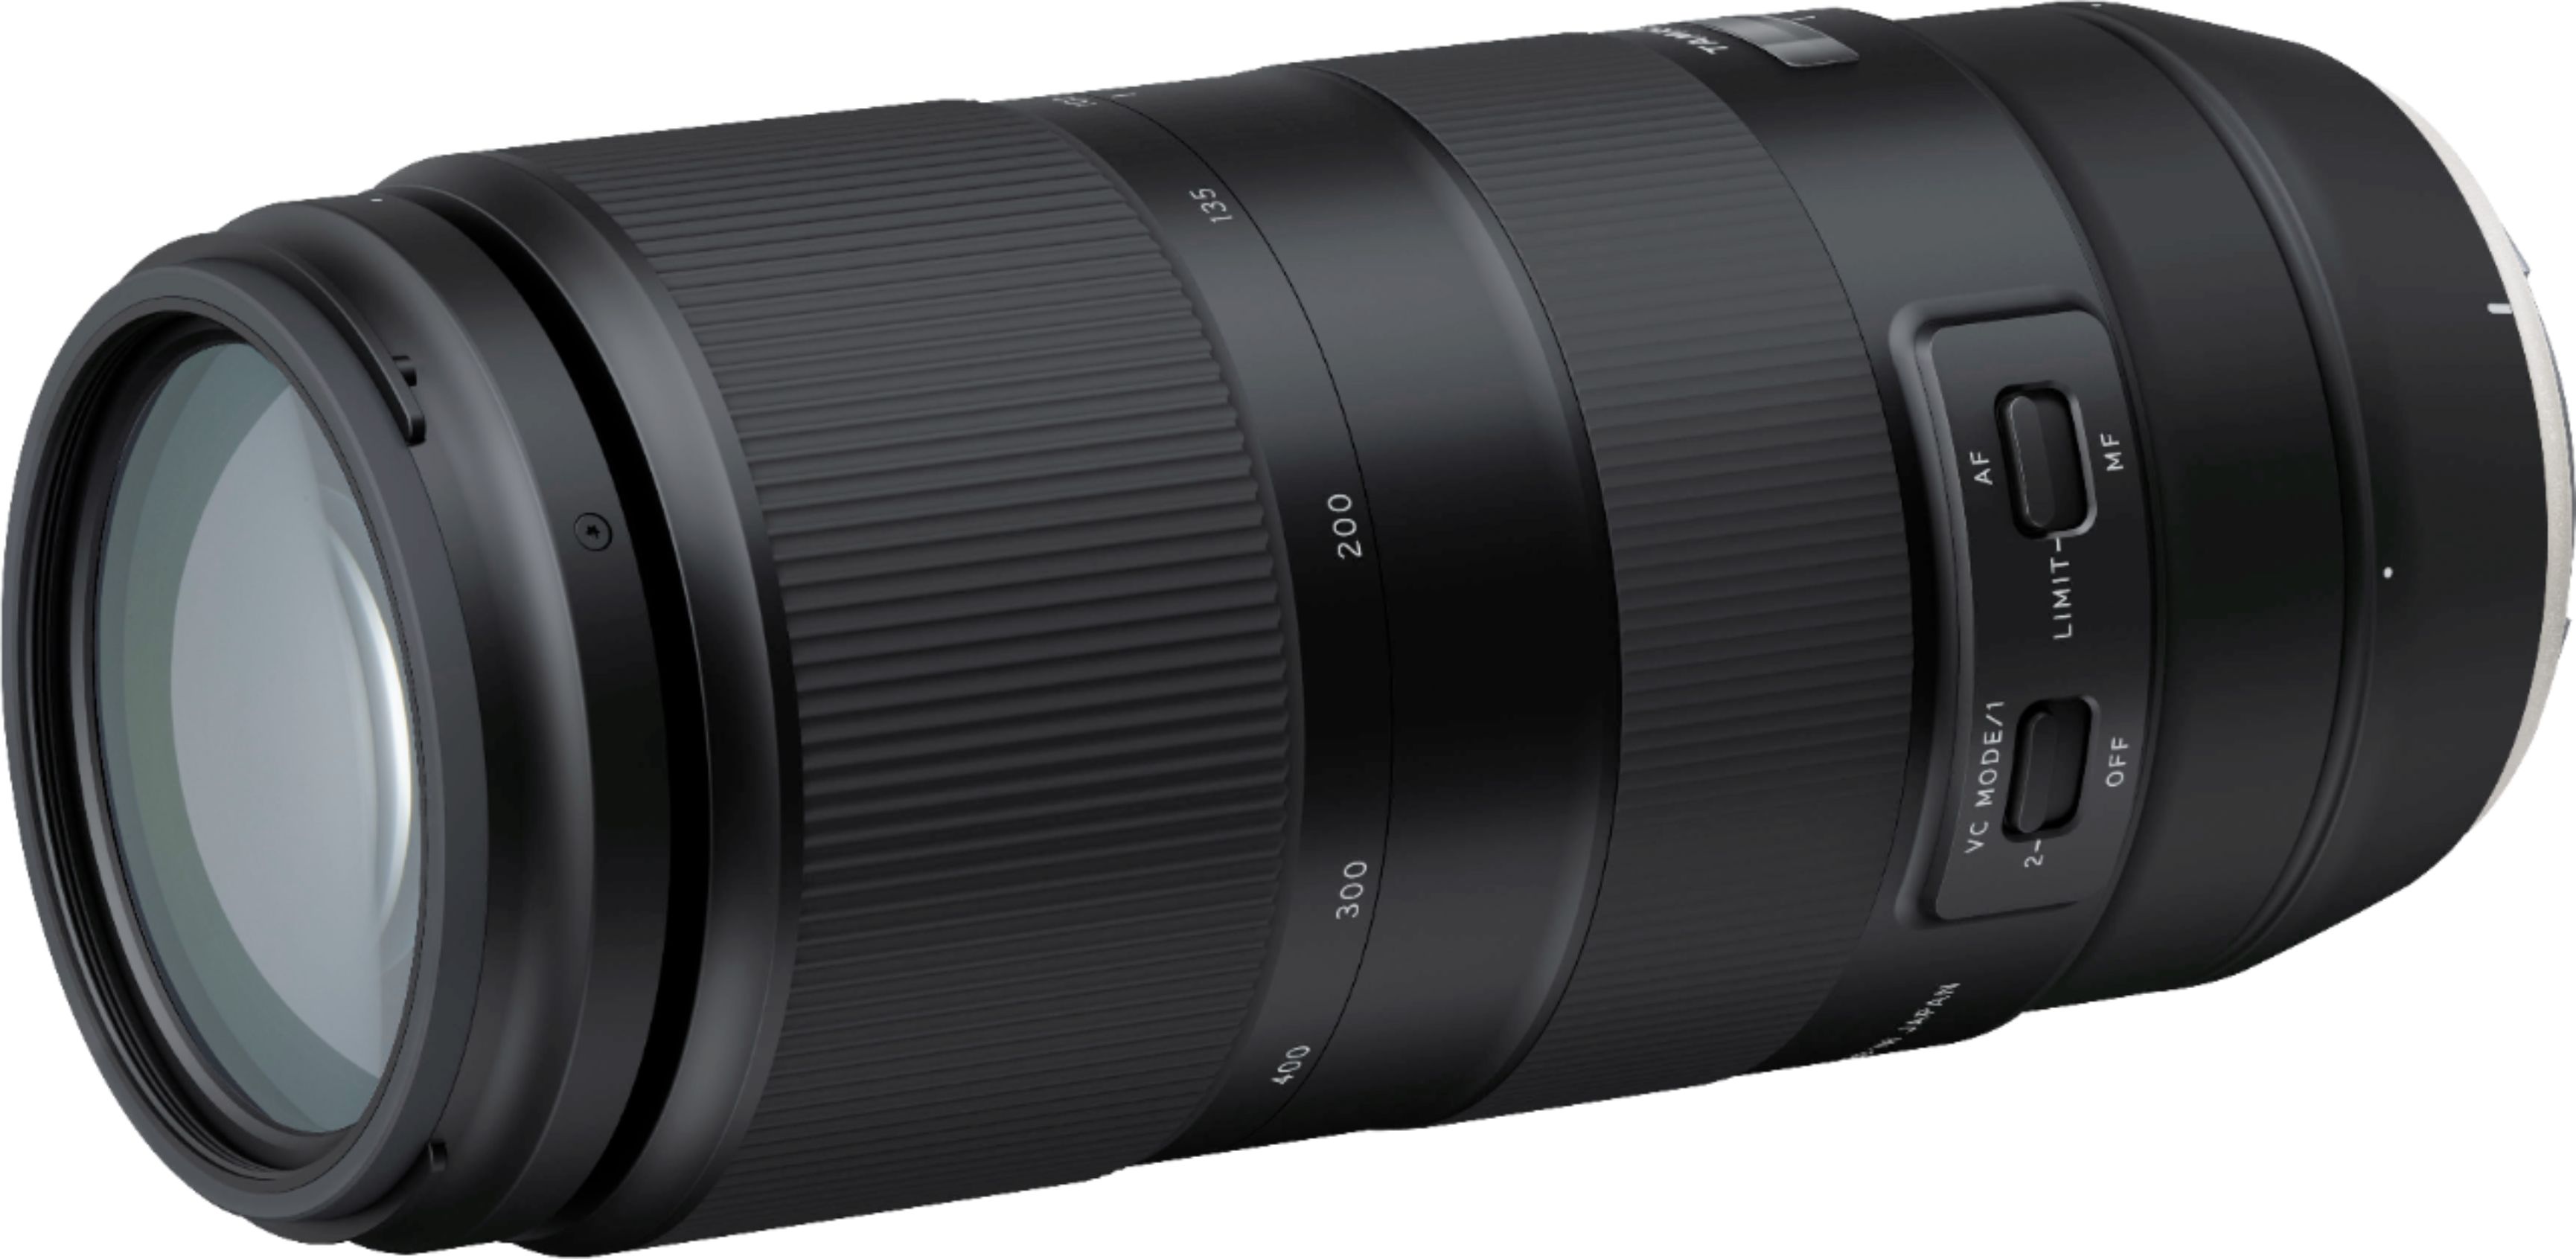 Angle View: Tamron - 24mm F/2.8 Di III OSD M1:2 Wide Angle Lens for Sony E-Mount